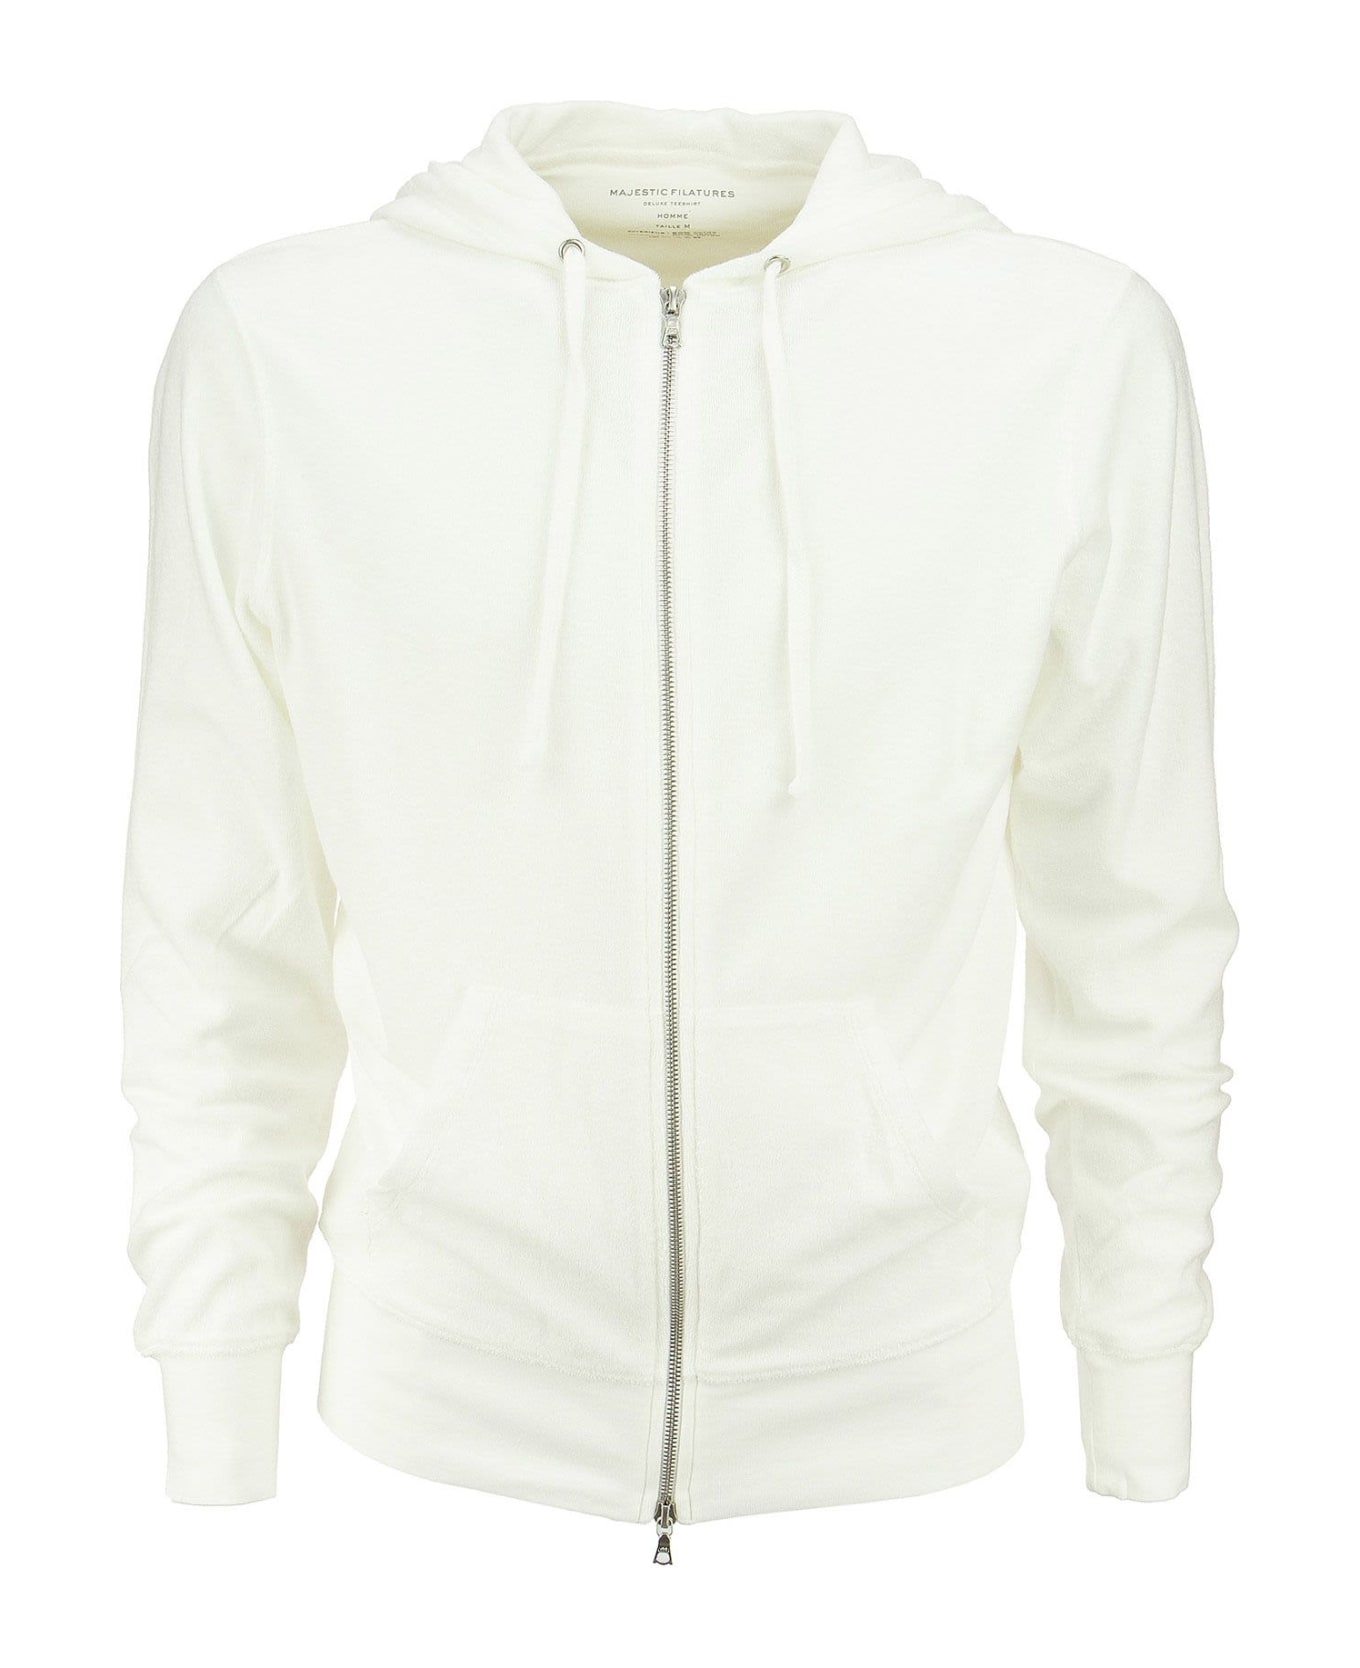 Majestic Filatures Hooded Sweatshirt In Cotton And Modal - White ニットウェア